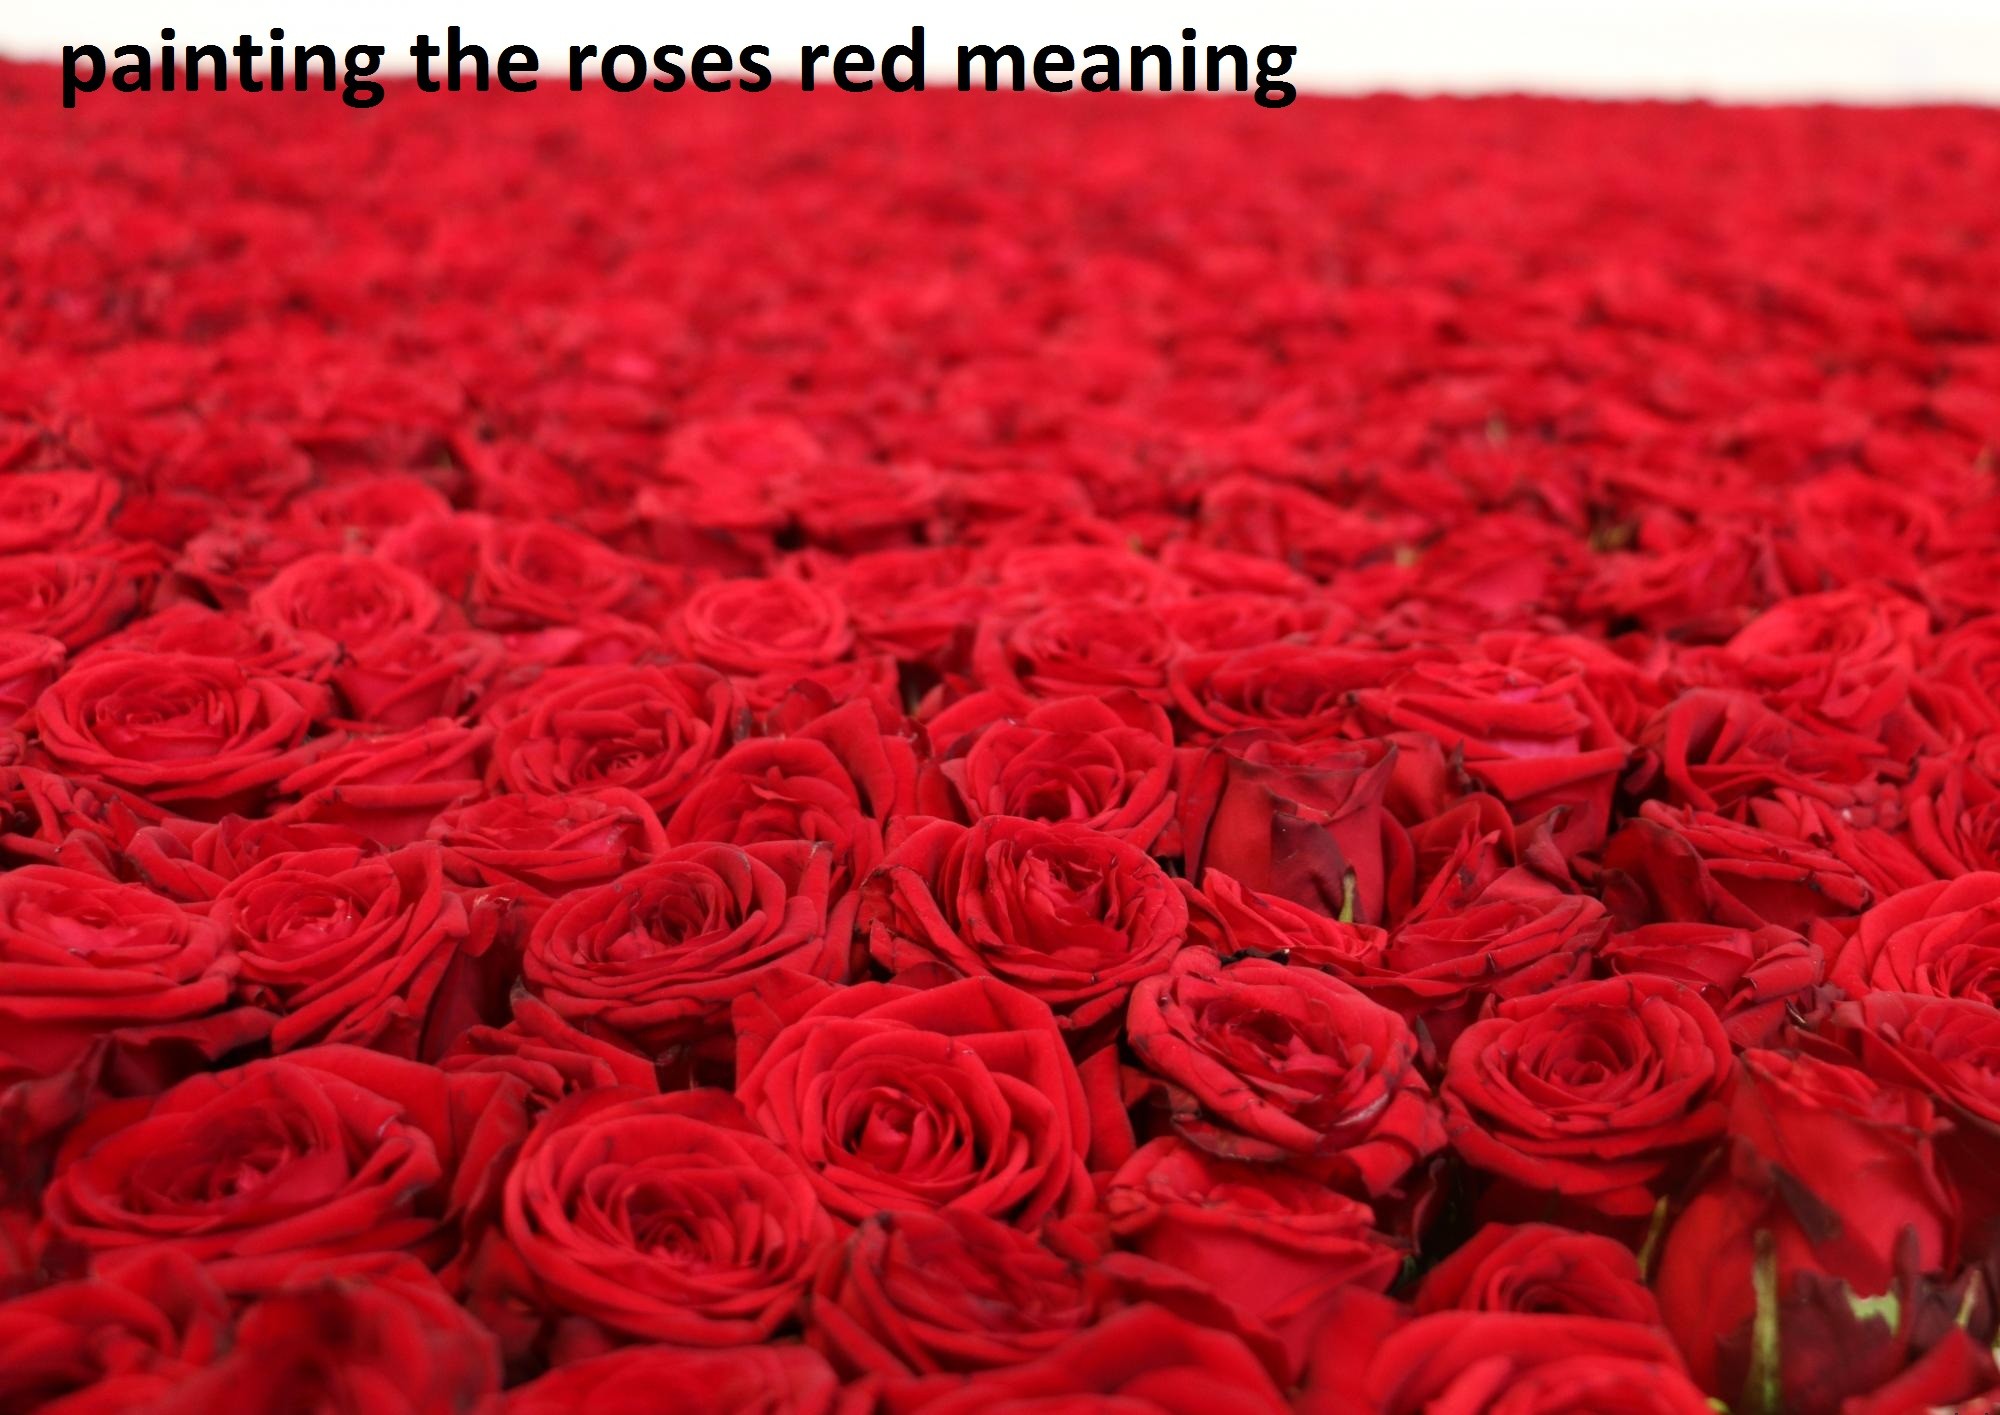 painting the roses red meaning